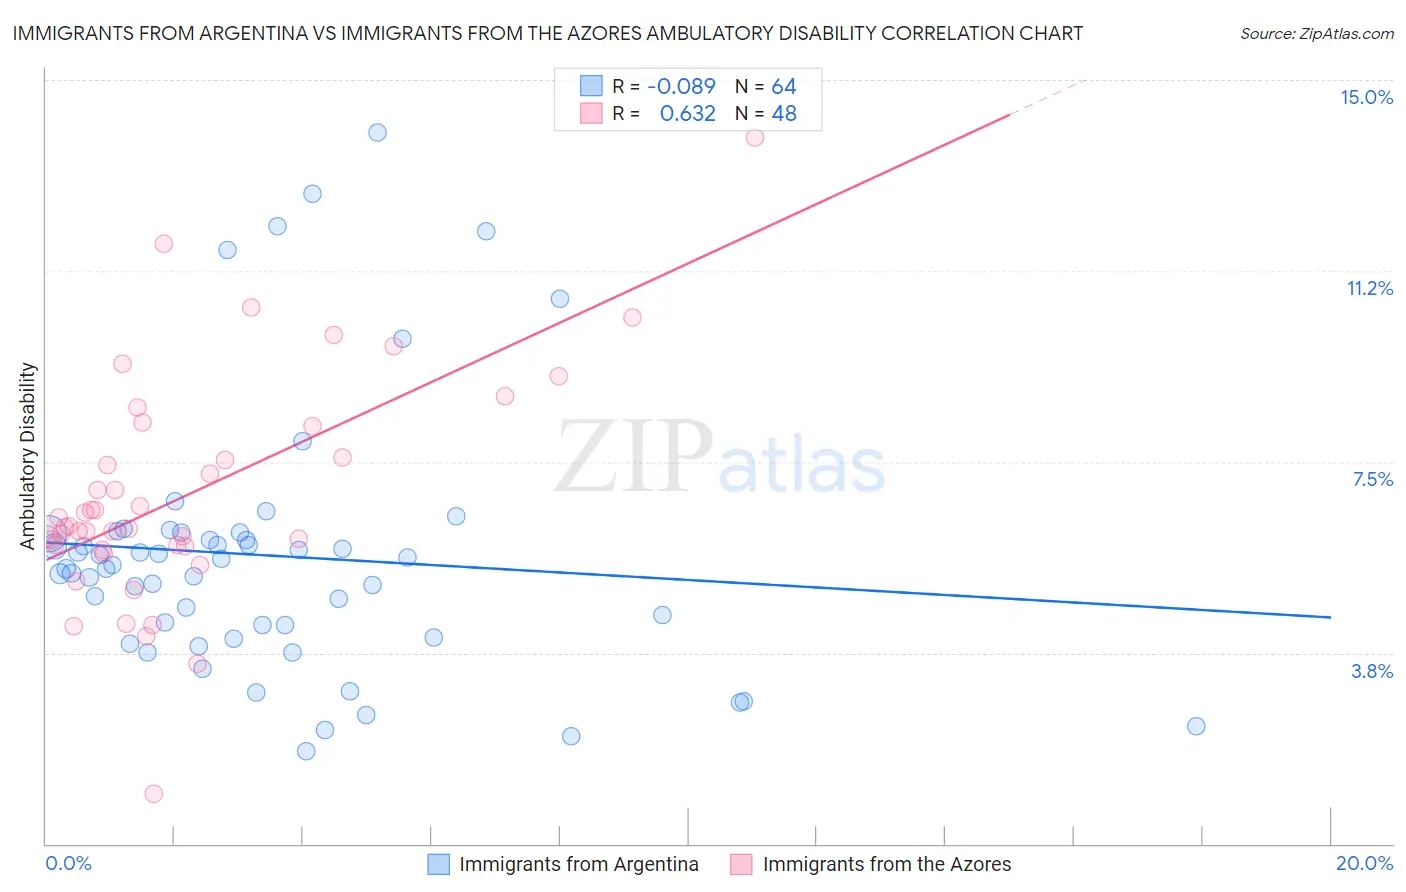 Immigrants from Argentina vs Immigrants from the Azores Ambulatory Disability